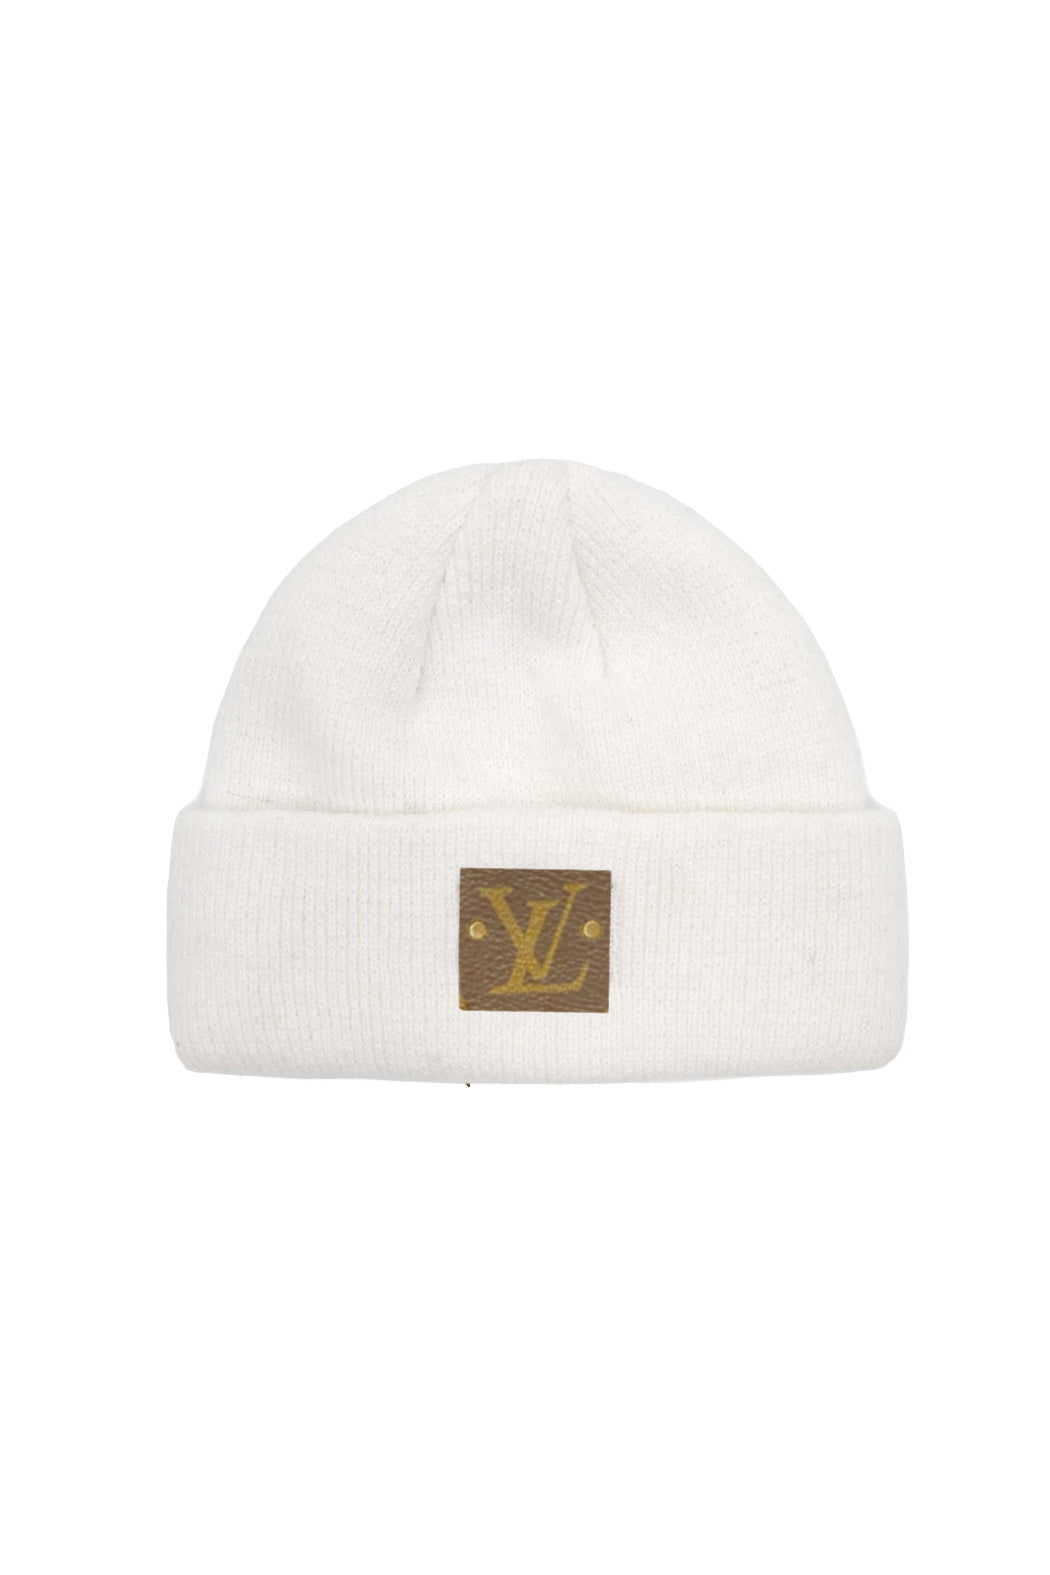 Upcycled LV Classic Baby Beanie